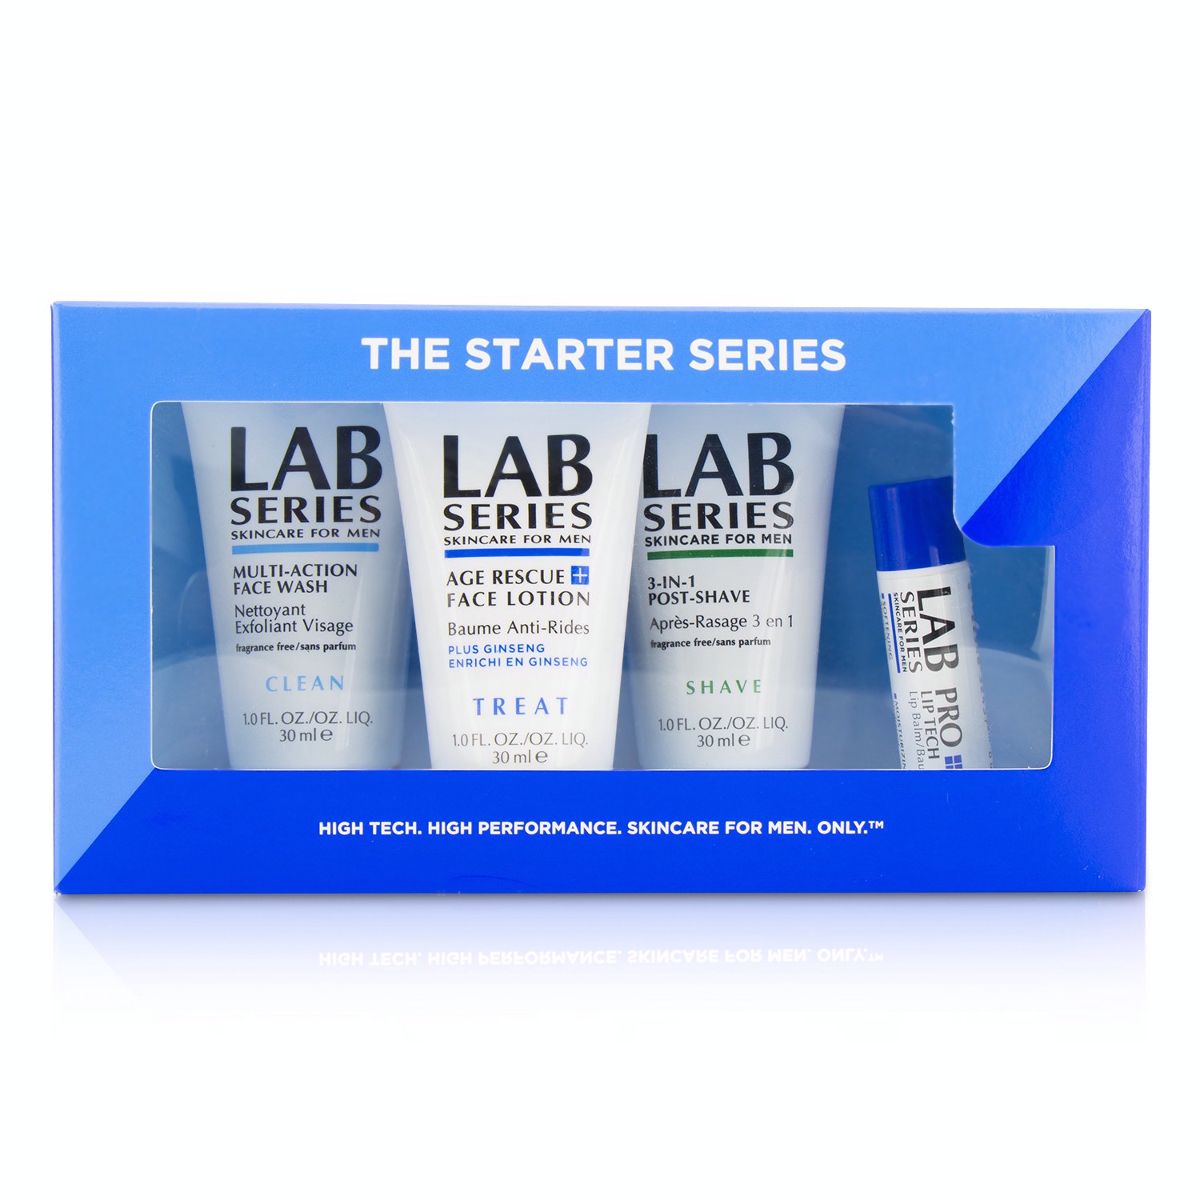 Lab Series The Starter Series : Multi-Action Face Wash 30ml + Face Lotion 30ml + Post Shave 30ml + Lip Balm 4.3g Aramis Image